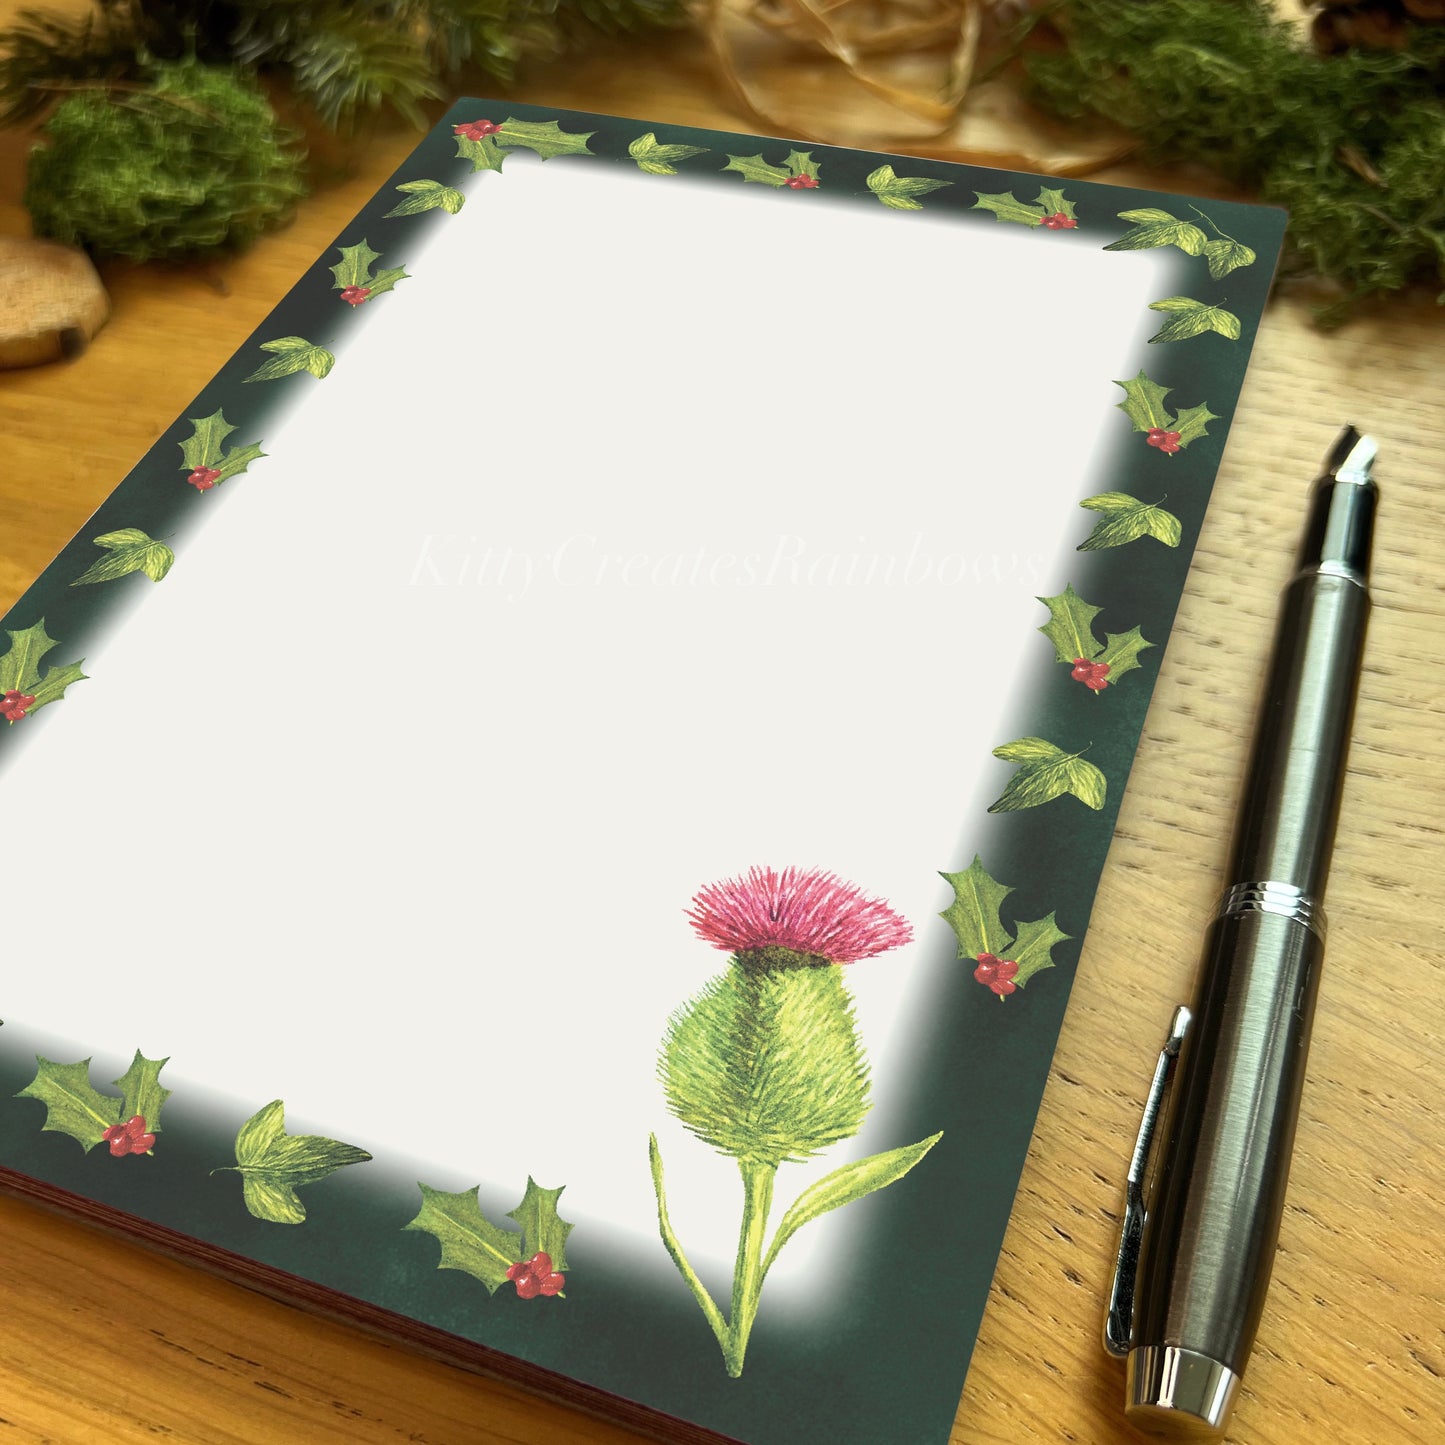 Winters bloom thistle illustrated notepad with dark evergreen border, on a wooden table with fountain pen